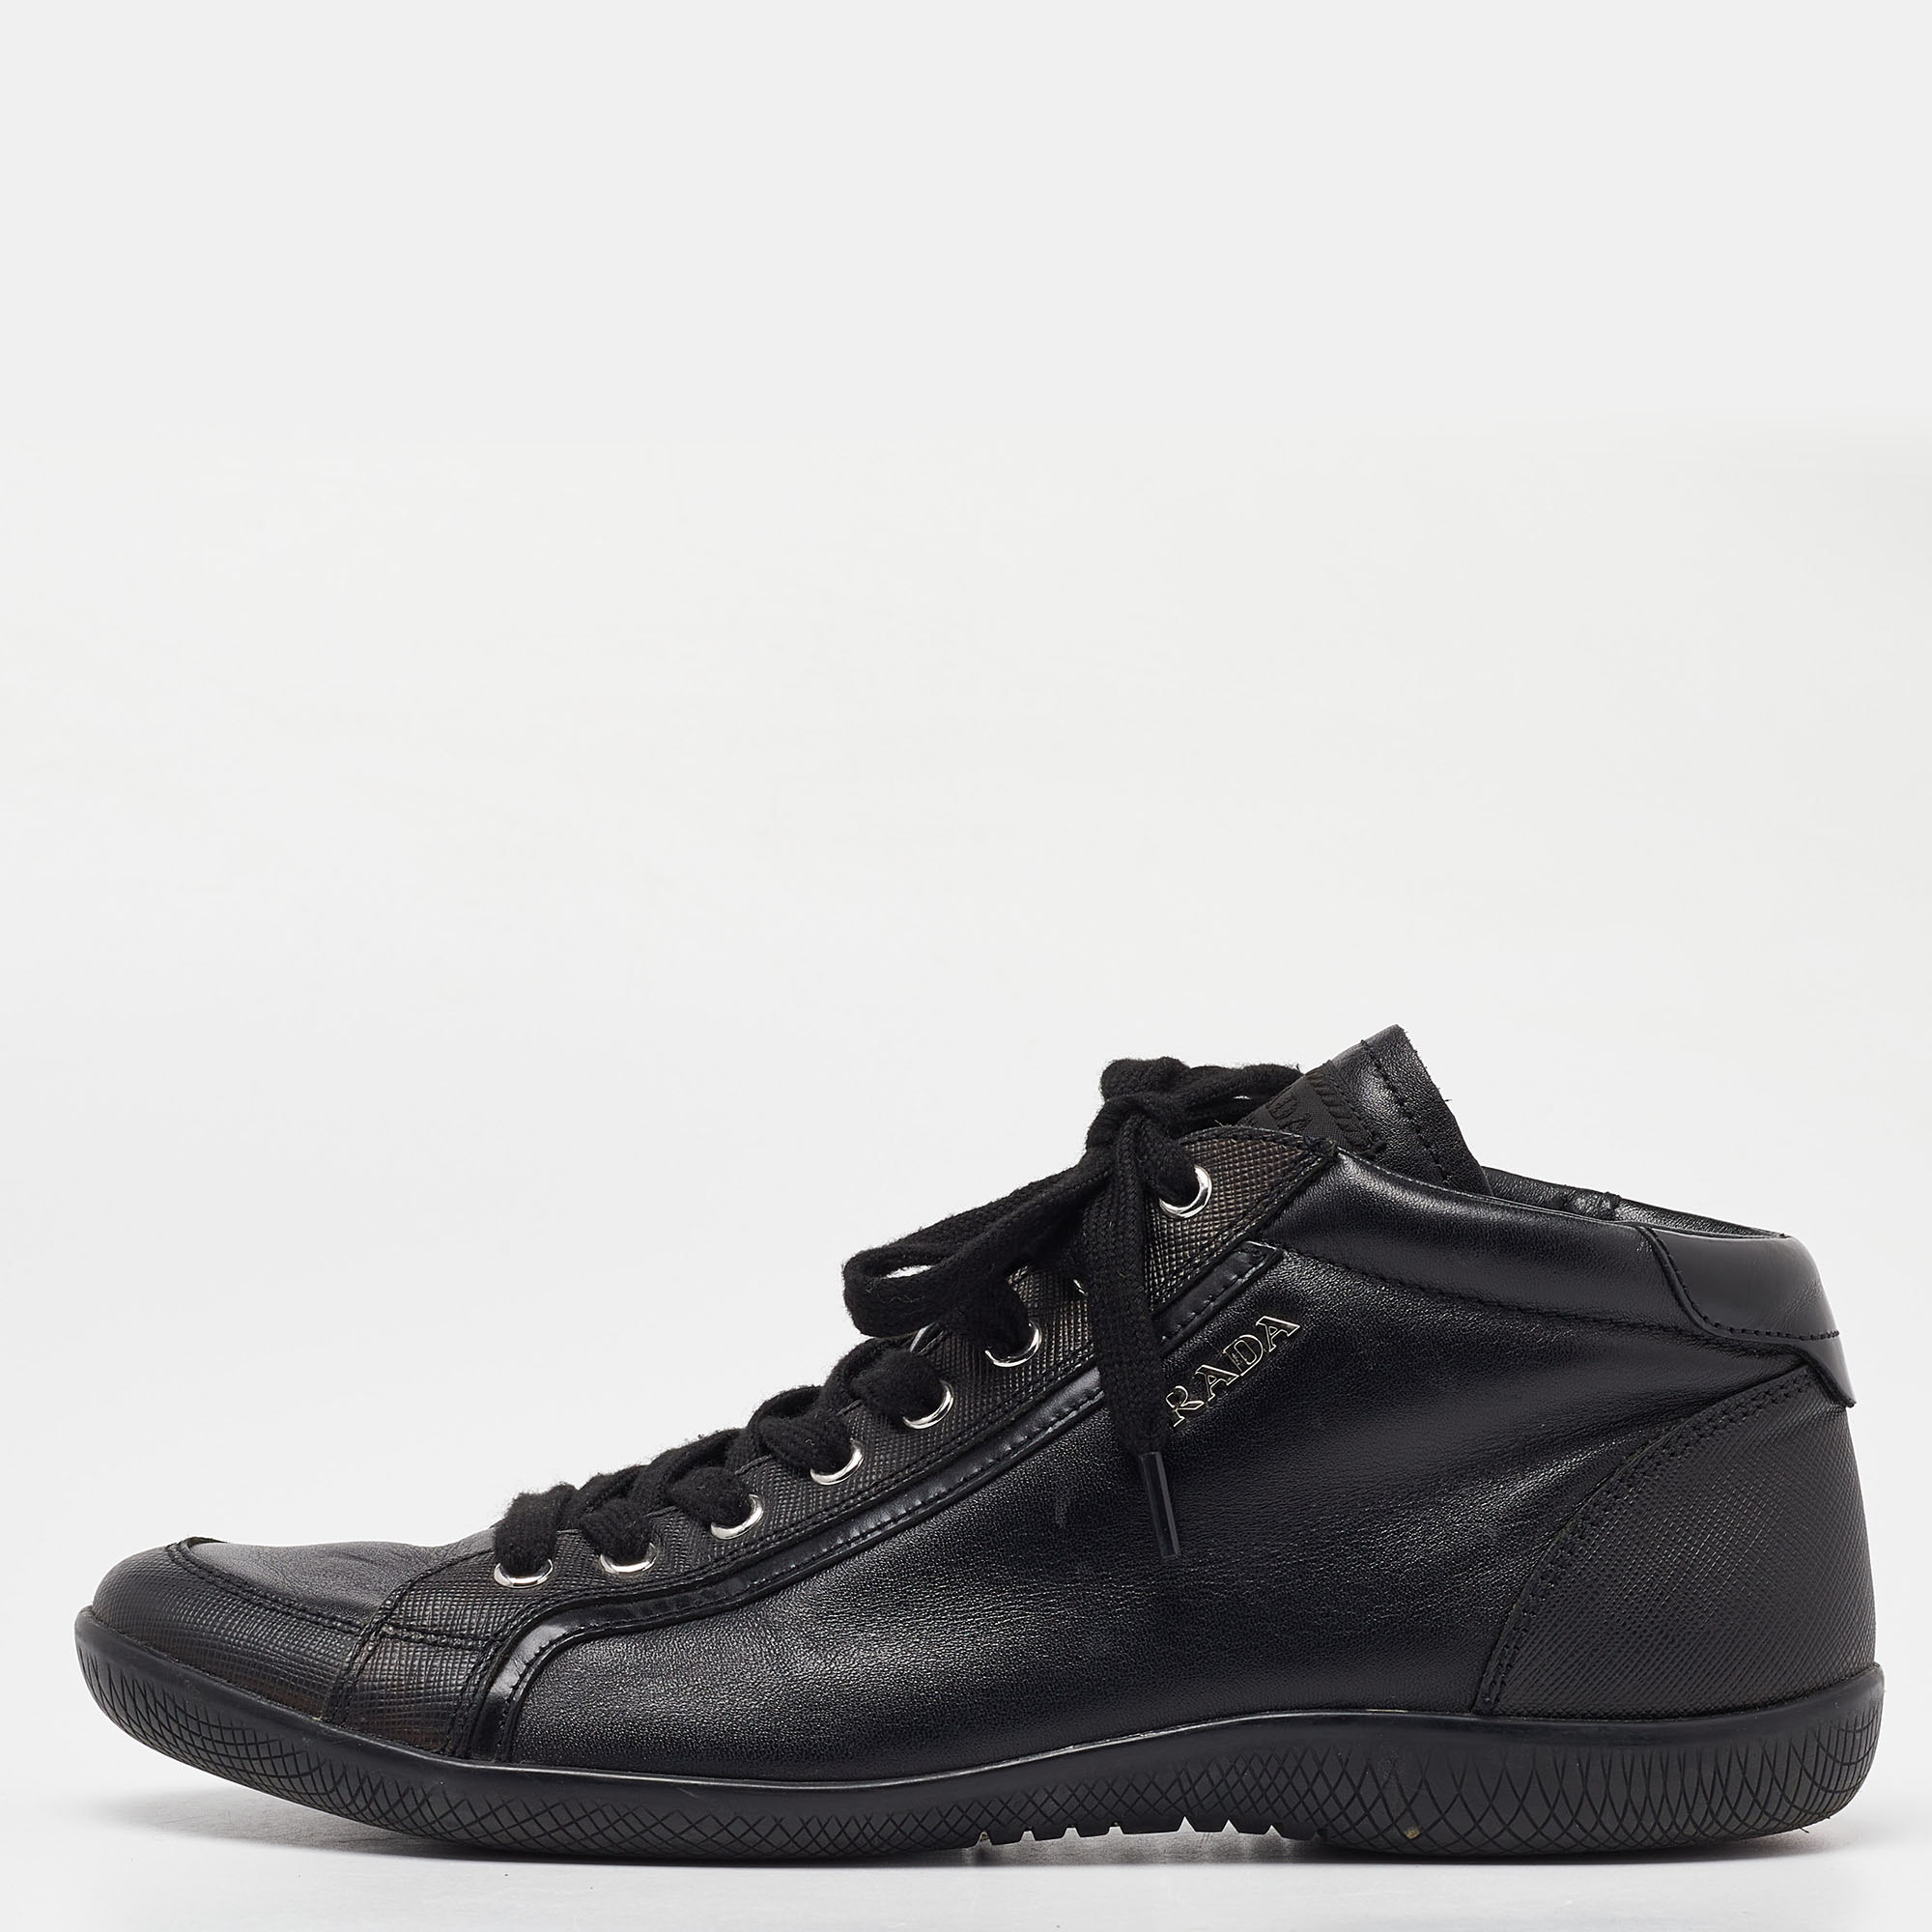 Pre-owned Prada S Black Leather High Top Sneakers Size 39